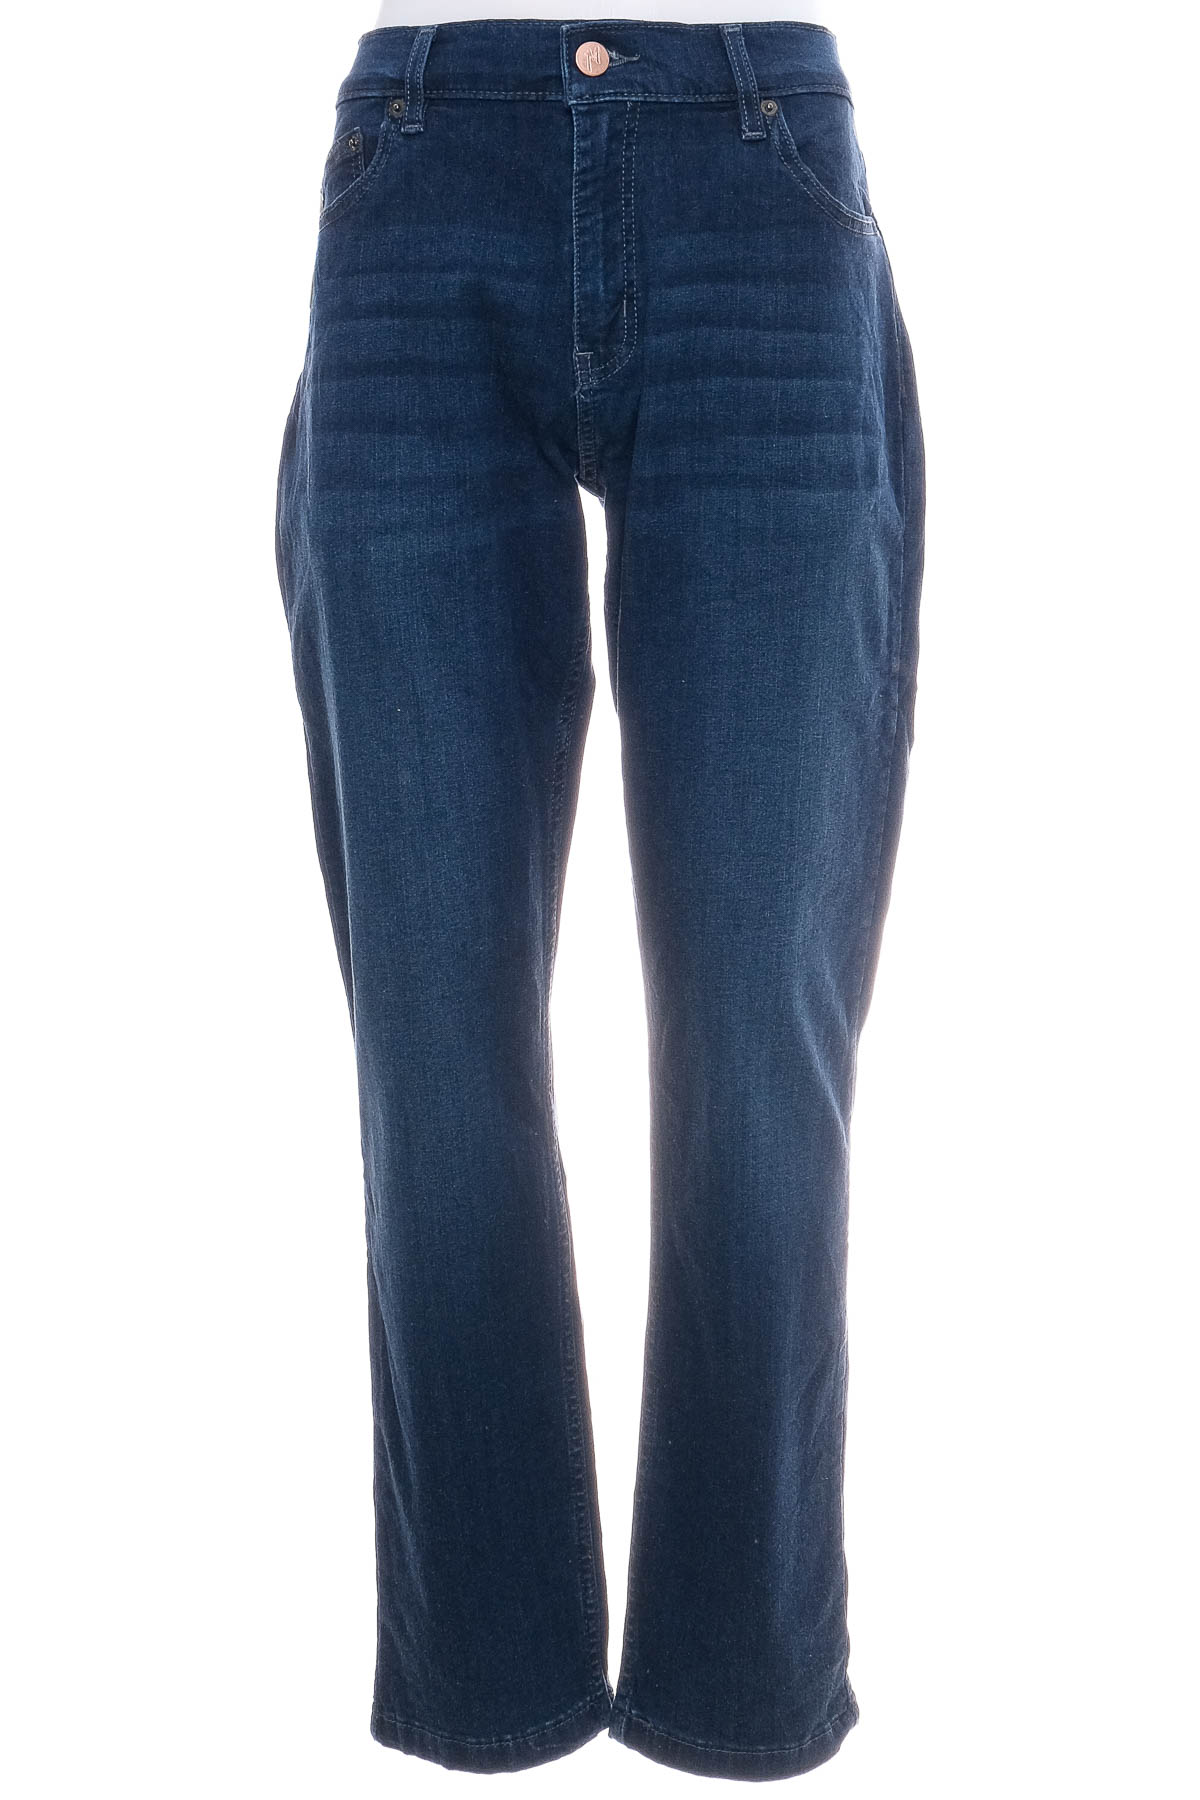 Men's jeans - Mugsy Jeans - 0